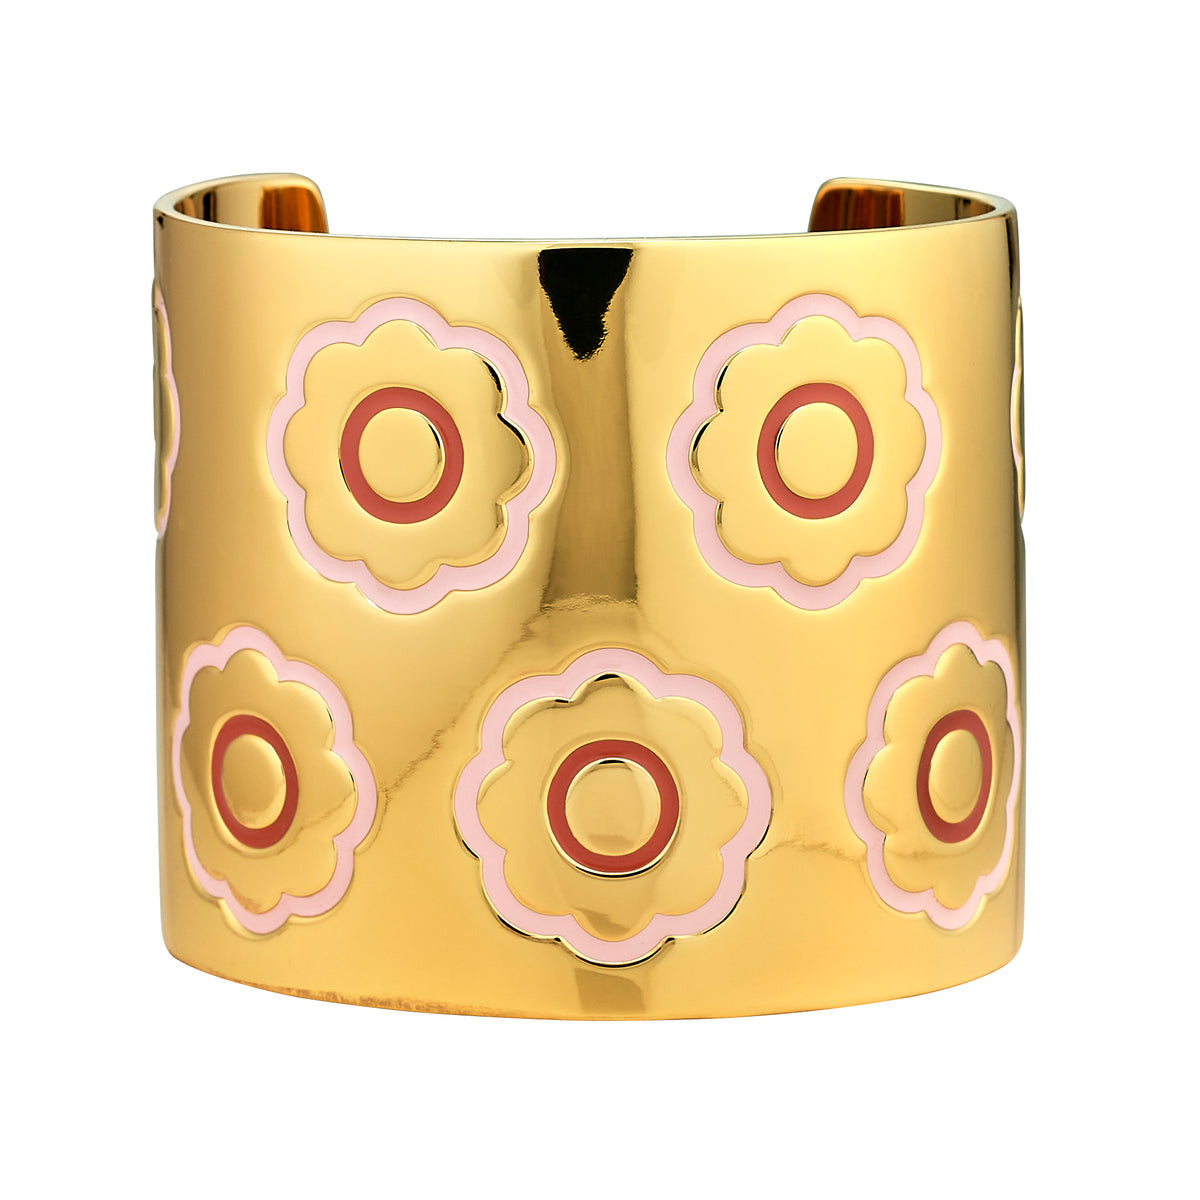 Engraved Flower Cuff - Coral